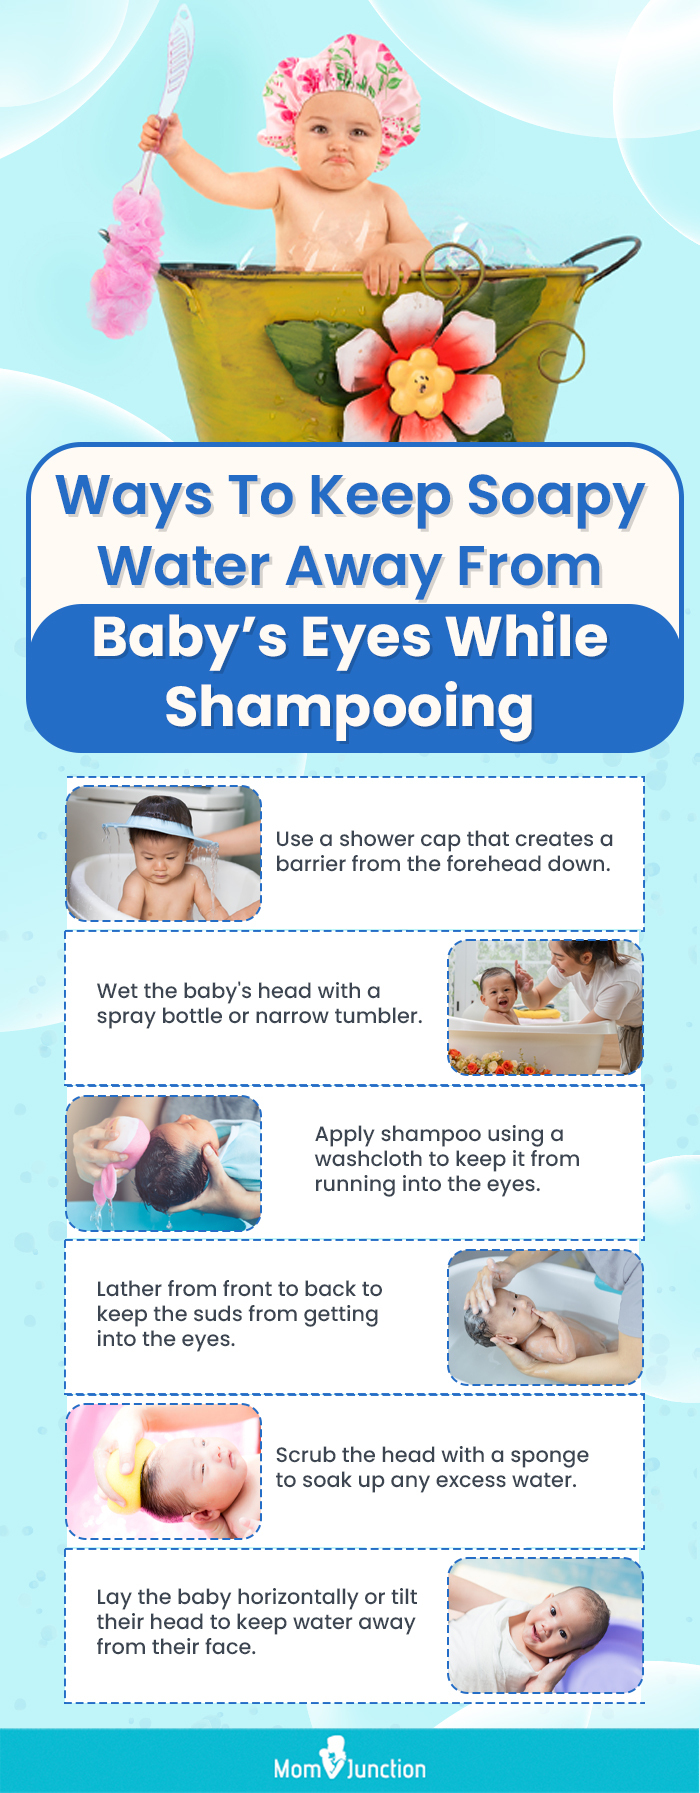 Ways To Keep Soapy Water Away From Baby’s Eyes While Shampooing (infographic)